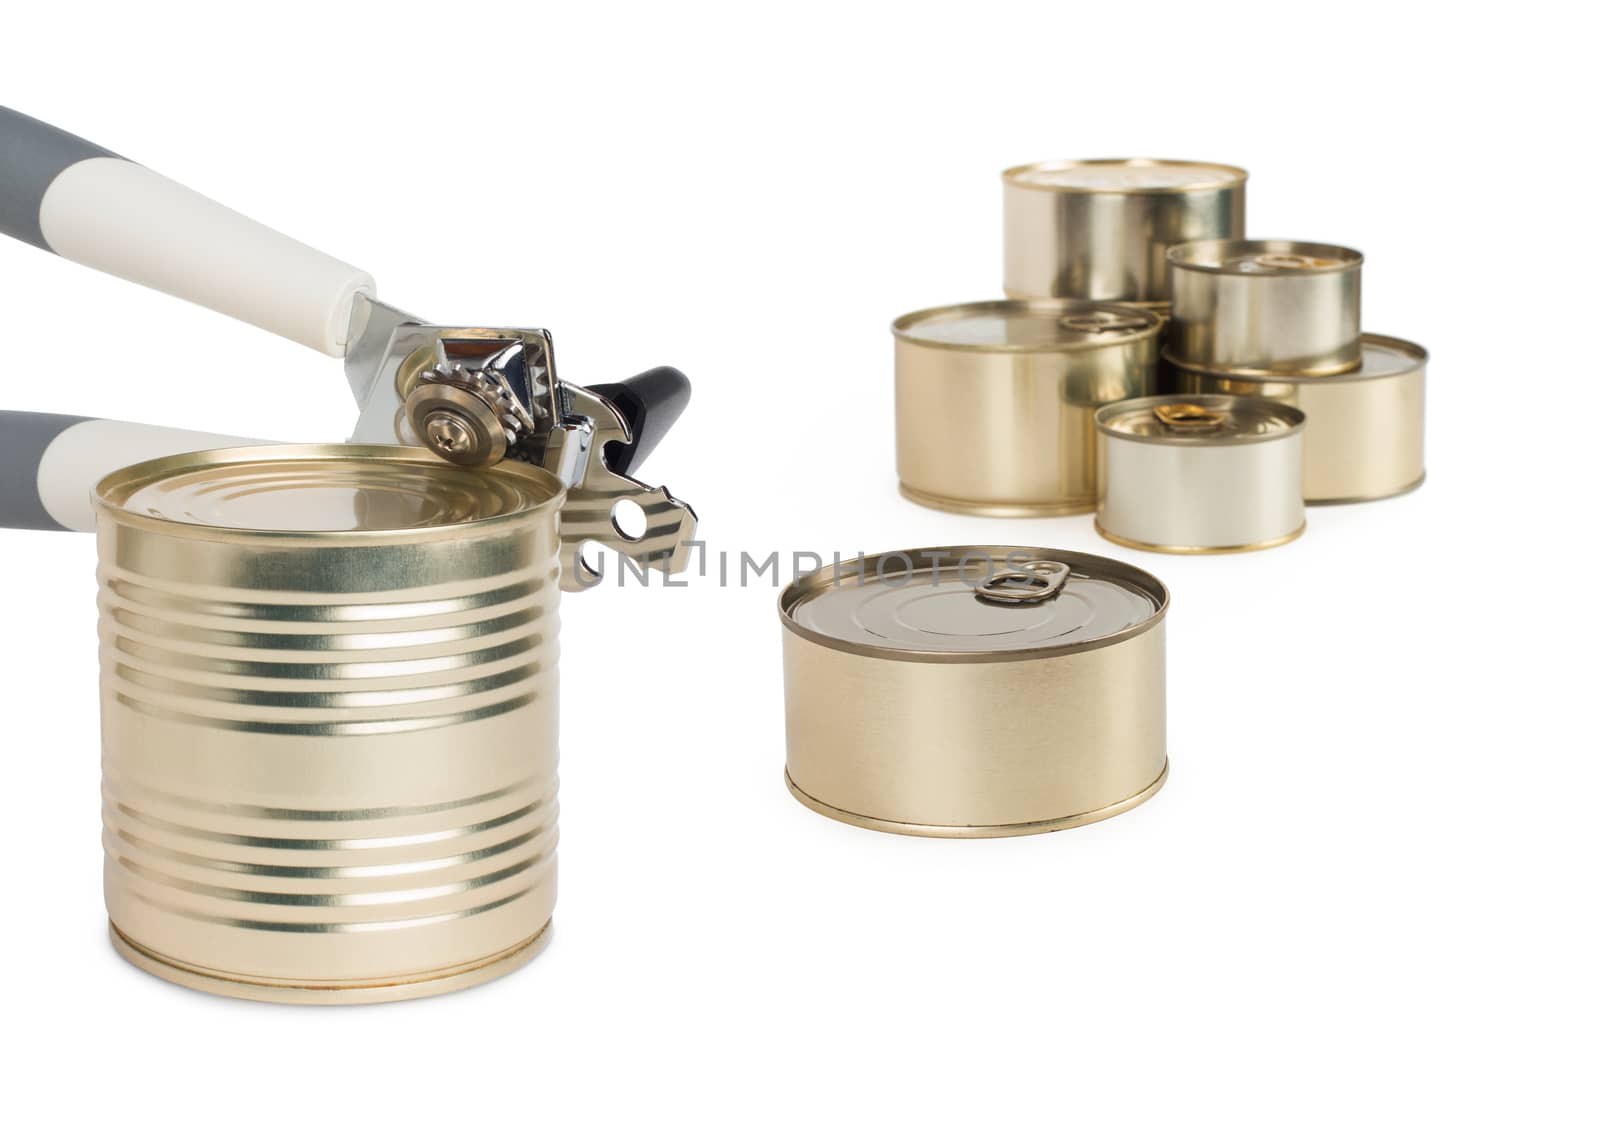 Tin cans opener by ozaiachin